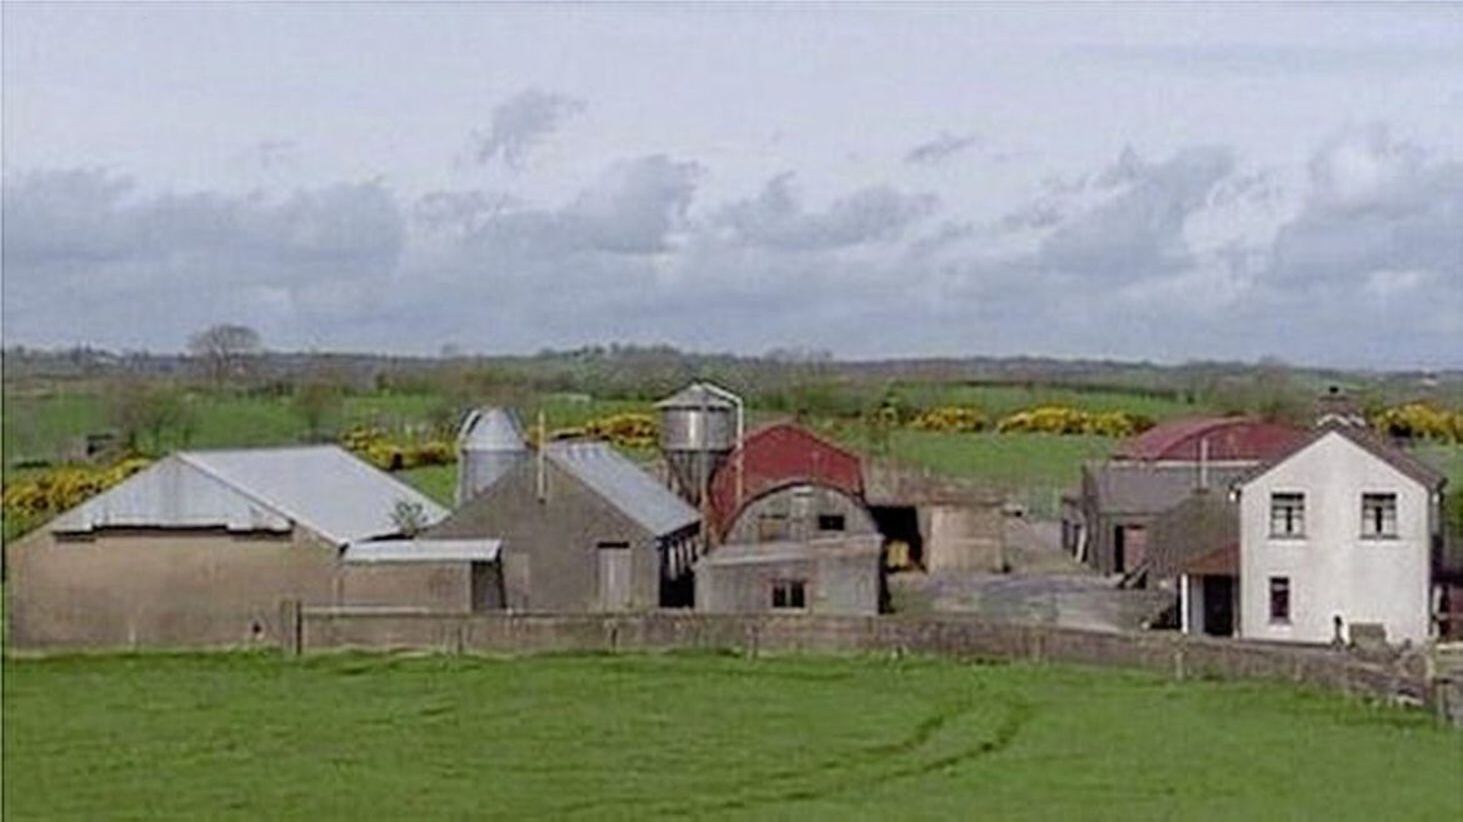 A farm in Glenanne was alleged to be the base for a UVF gang. Picture by New Red TV